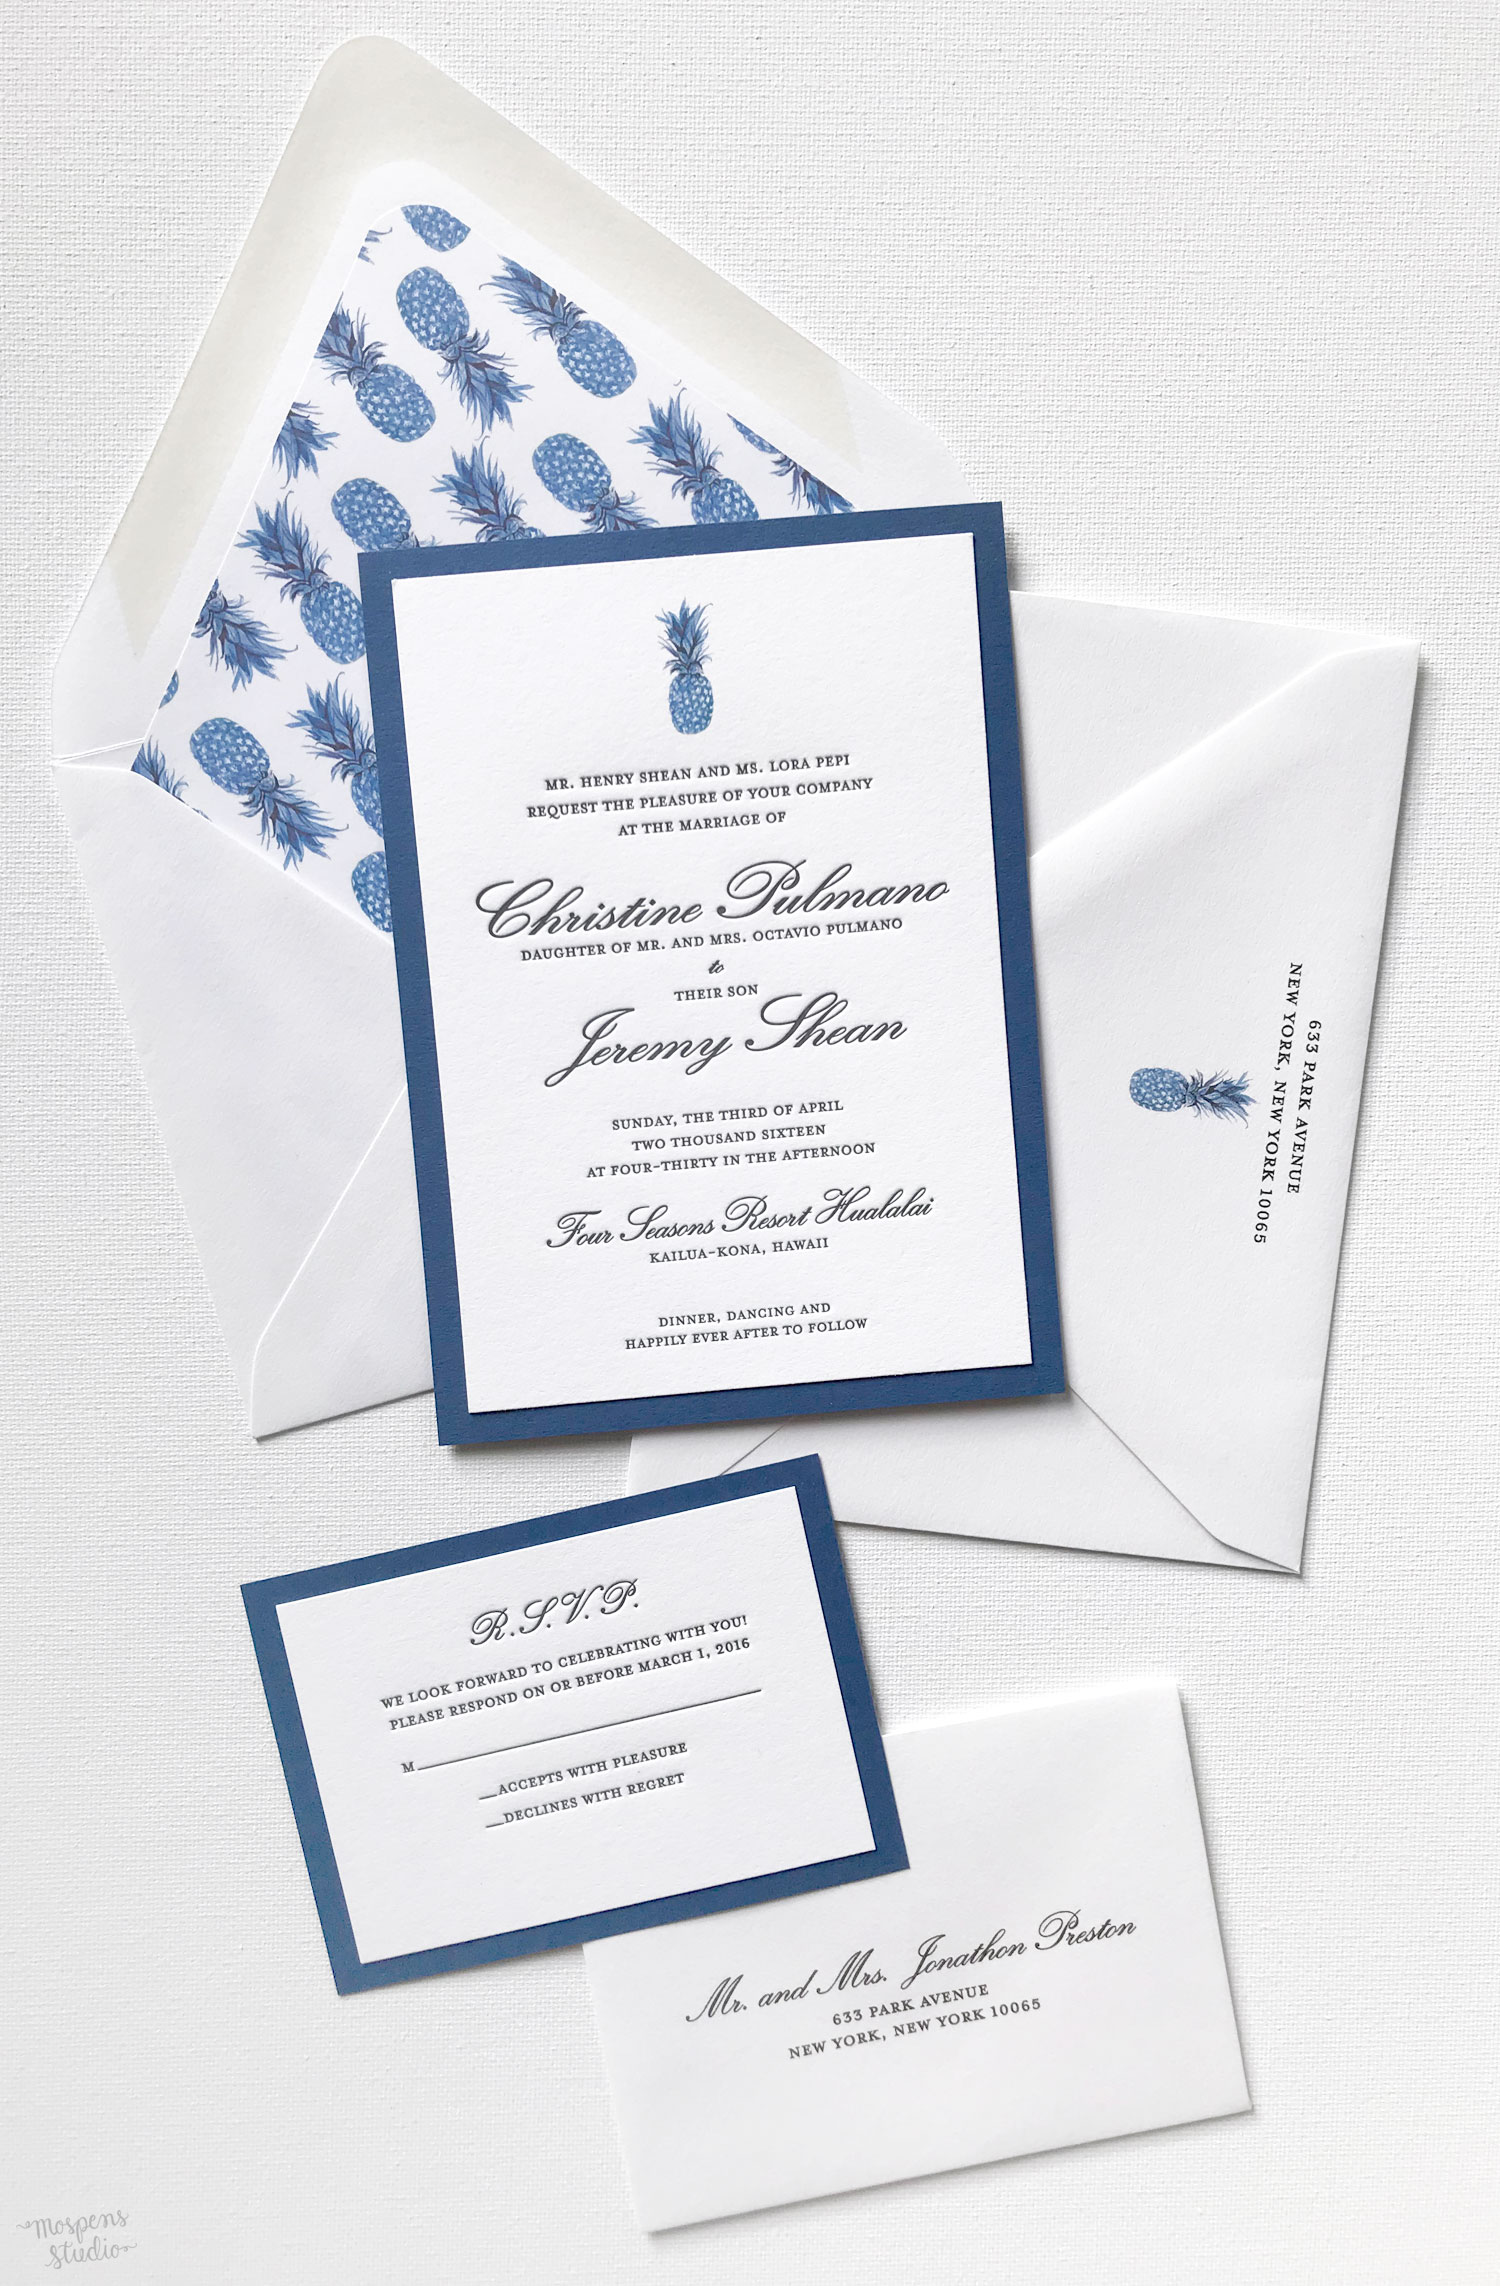 Elegant + tropical watercolor and letterpress pineapple wedding invitations in beautiful navy blue and classic black by Michelle Mospens. // Mospens Studio